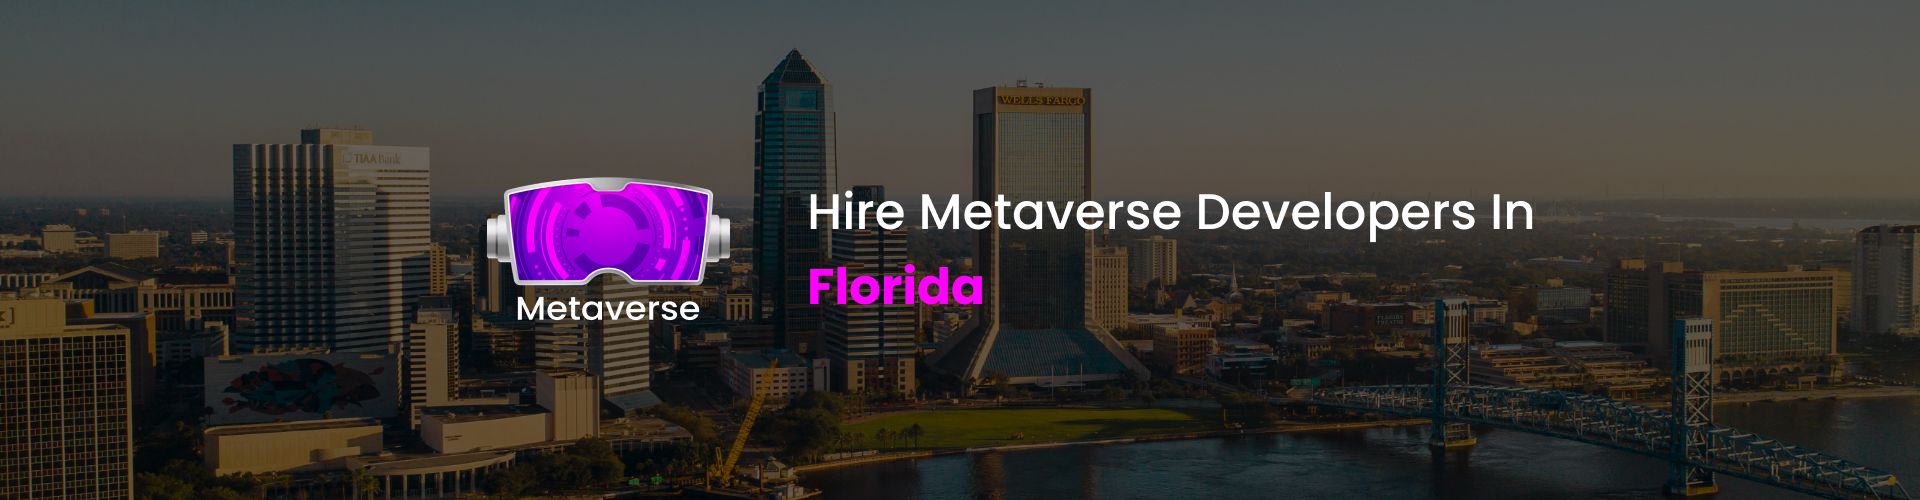 hire metaverse developers in florida